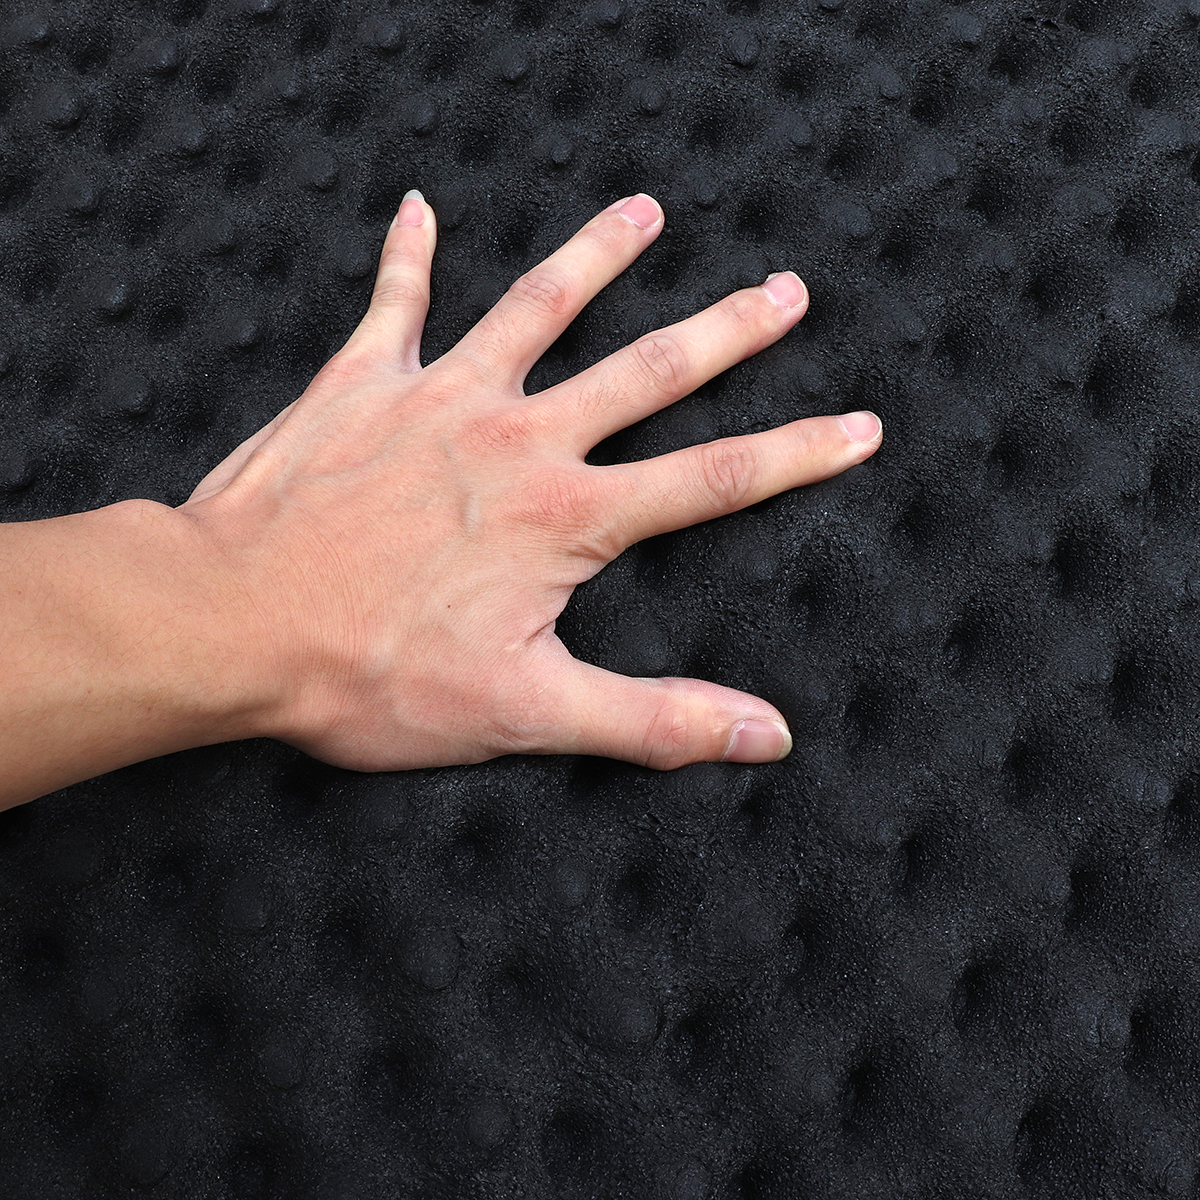 100x100cm-Car-SoundProof-Closed-Cell-Foam-Self-Adhesive-Acoustic-Foam-Thermal-Insulation-Waterproof-1382928-10